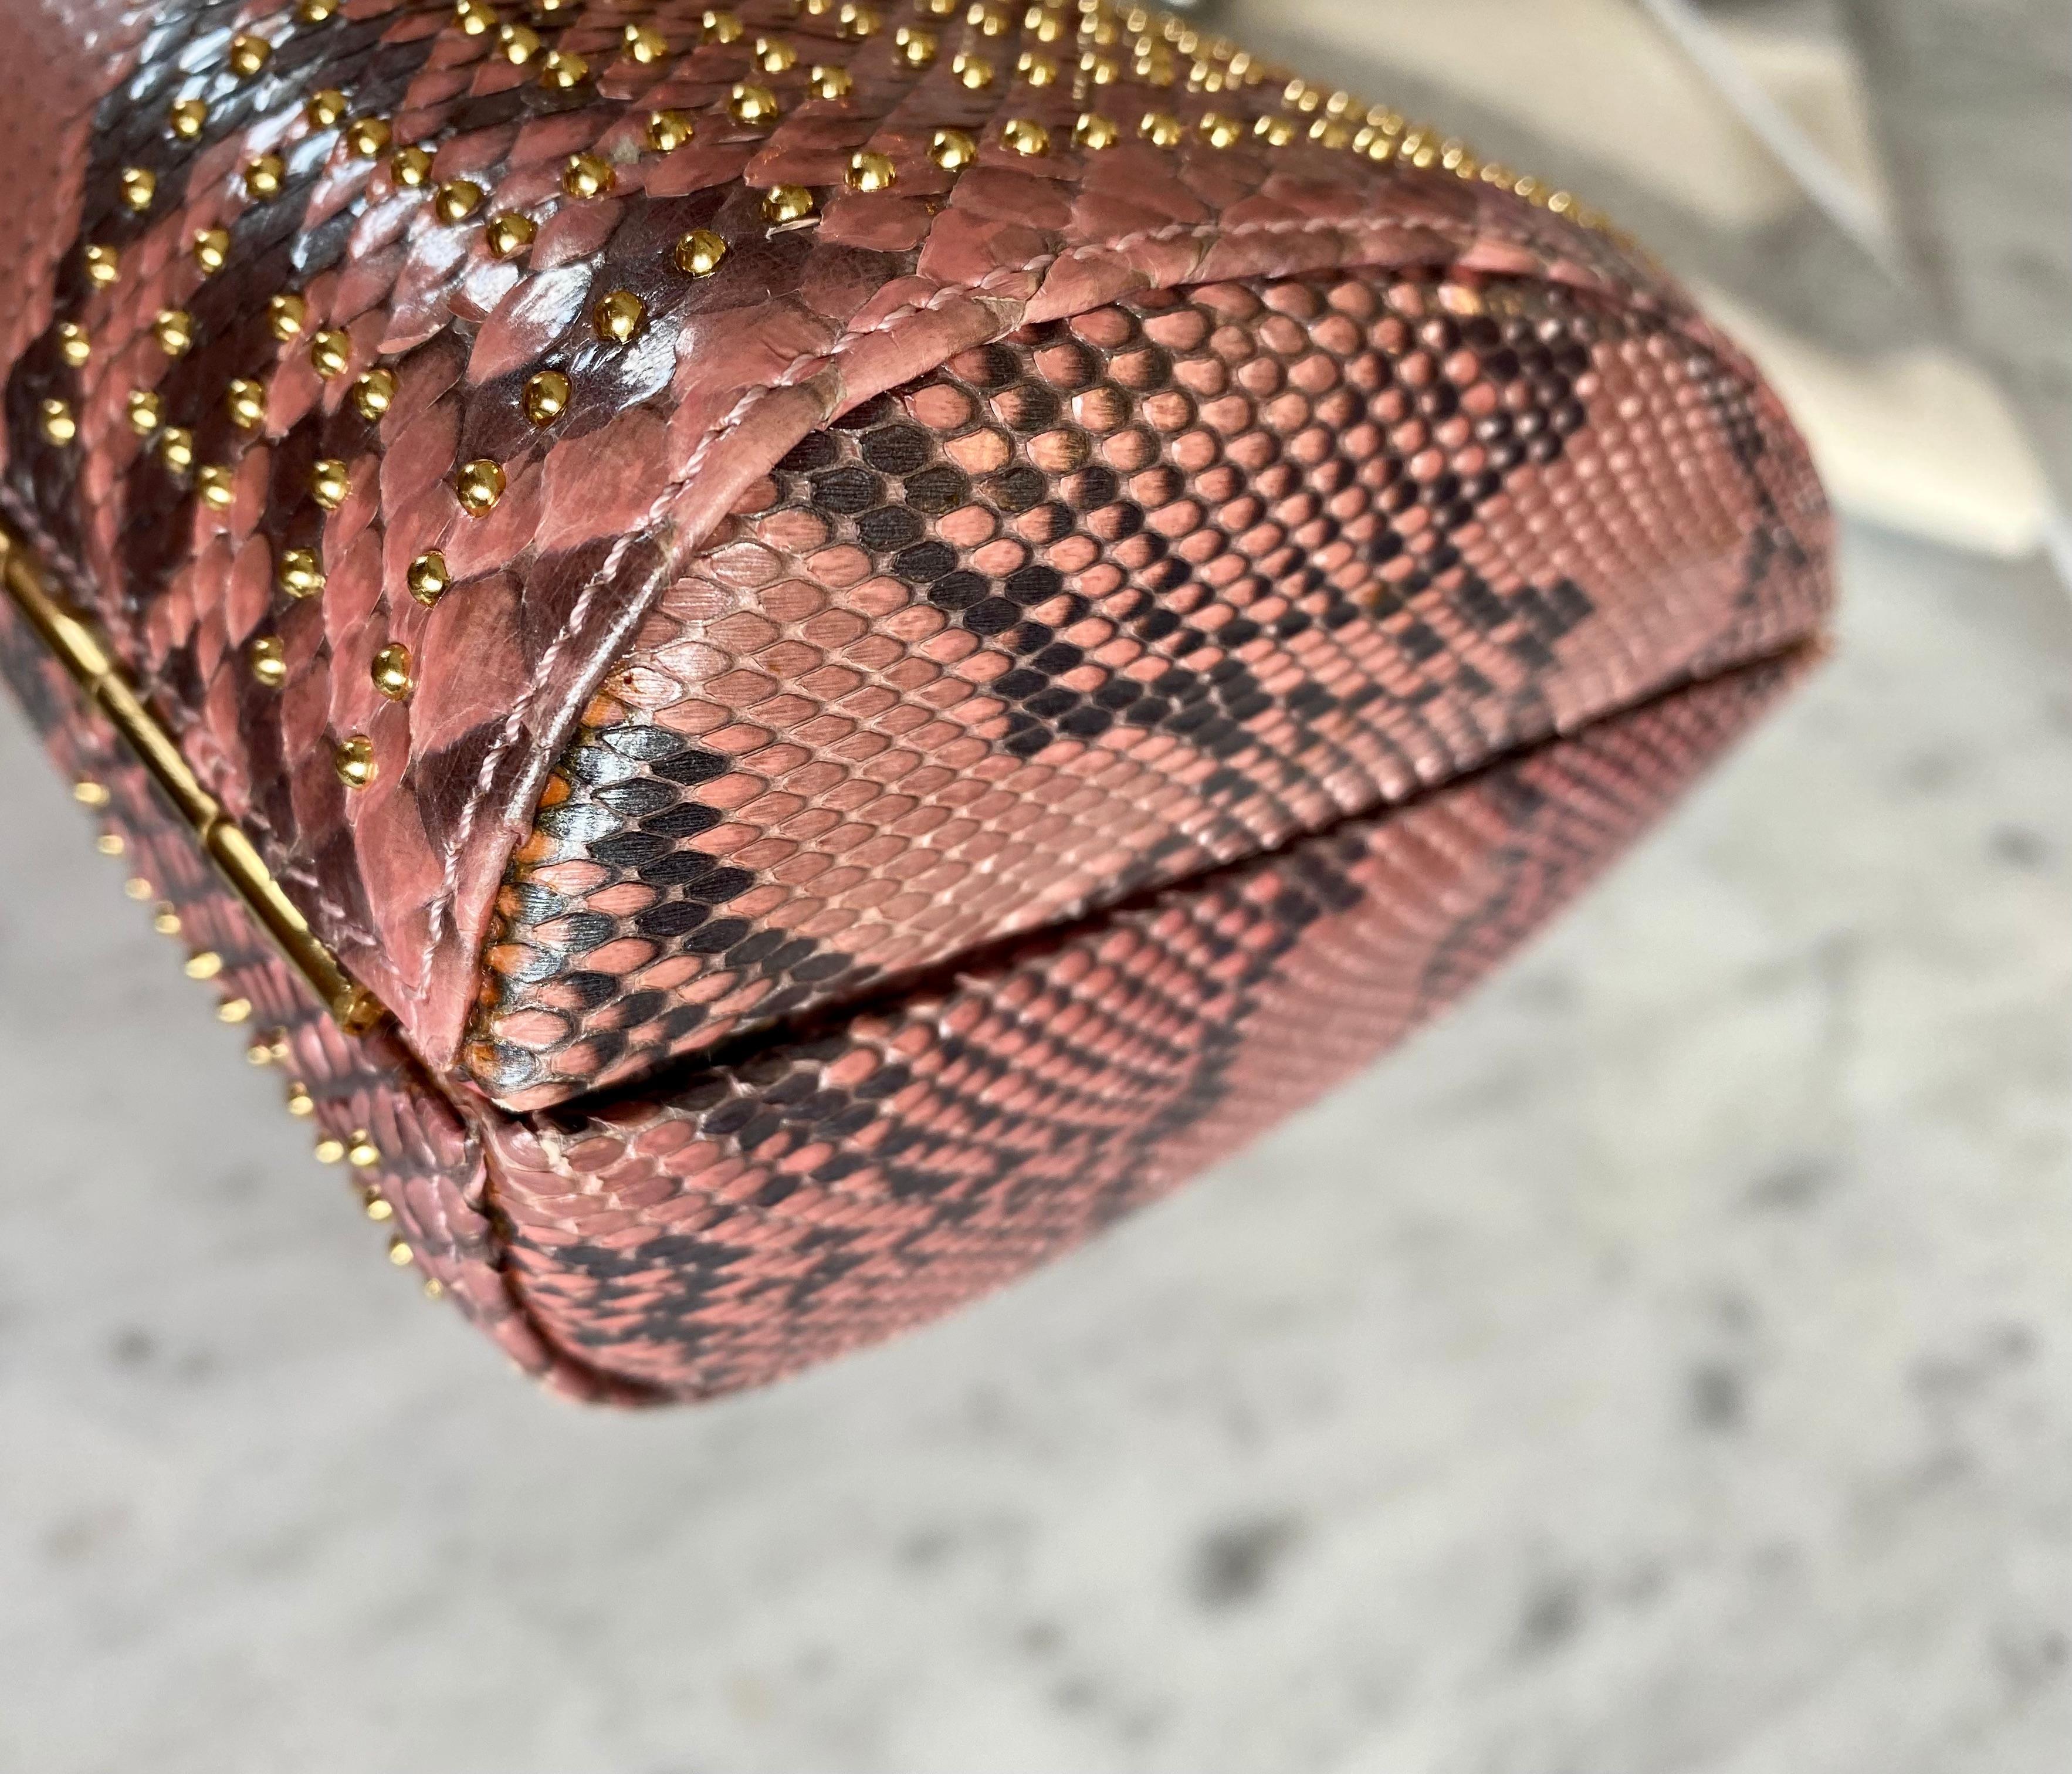 S/S 2000 Gianni Versace Python Pink Convertible Evening Bag & Clutch Donatella For Sale 3